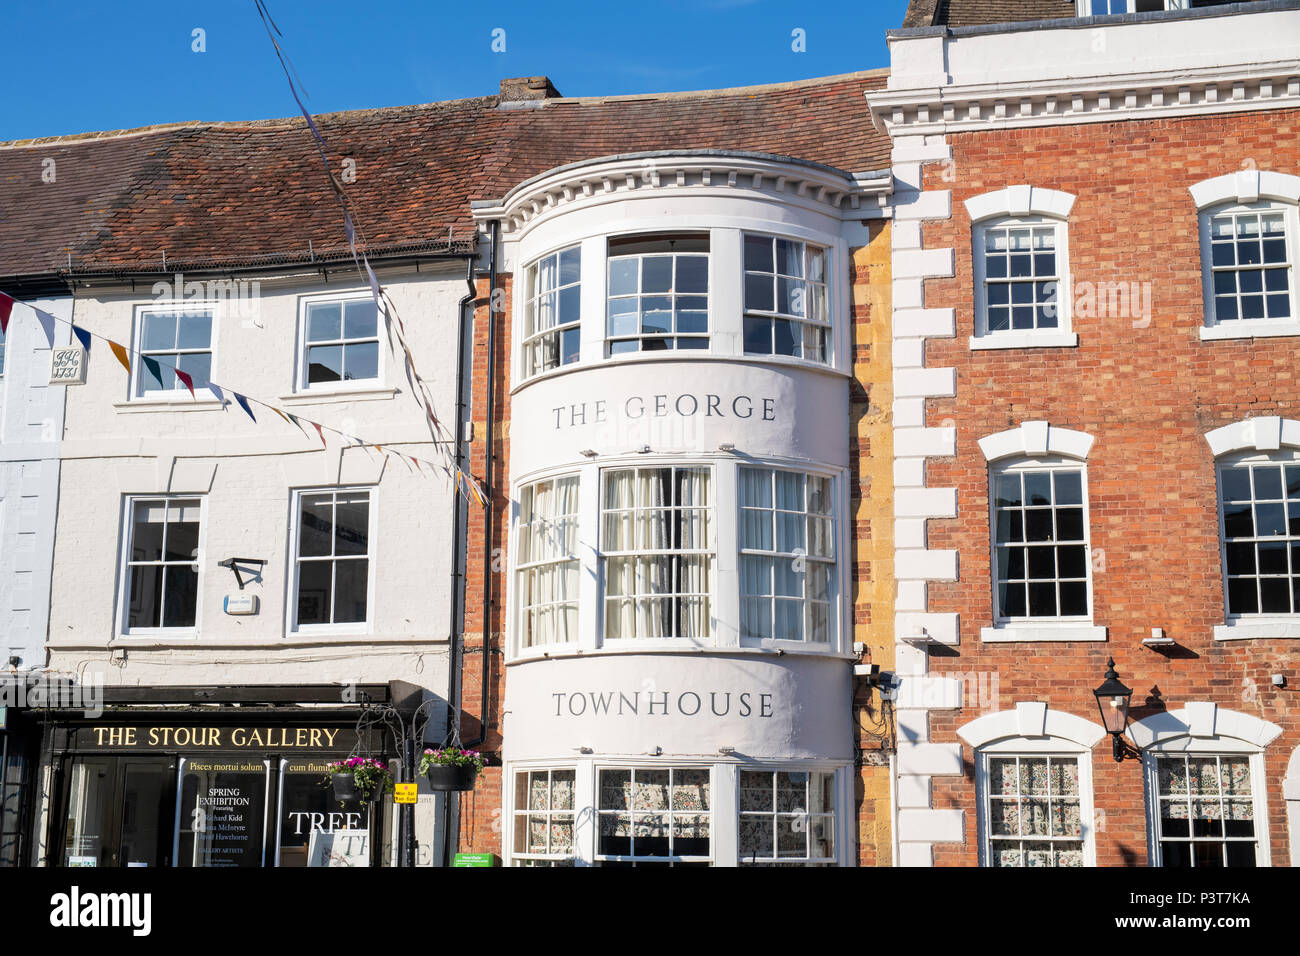 Il George Townhouse hotel a Shipston on Stour, Warwickshire, Inghilterra Foto Stock